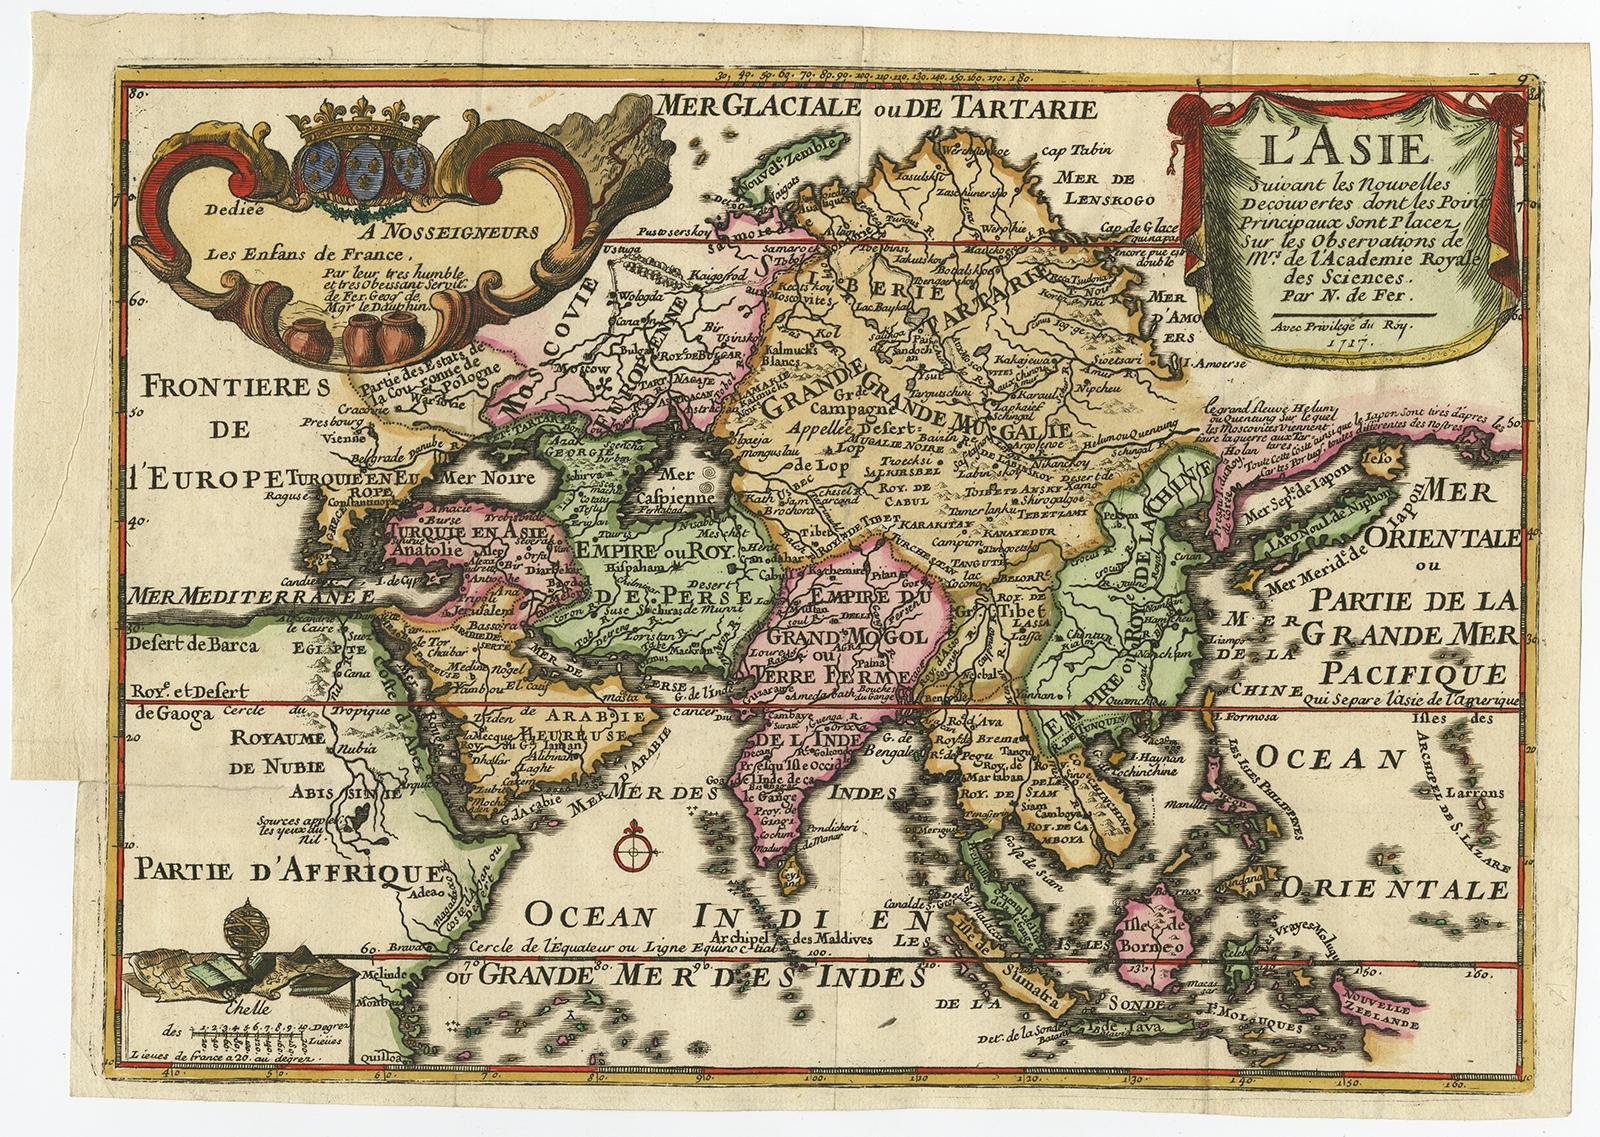 Antique map titled 'L'Asie Suivant les Nouvelles Decouvertes (..).' Interesting and very unusual map of the Asian continent. The map is based primarily on Dutch sources, particularly the outlines of Siberia and the East Indies. However, the most